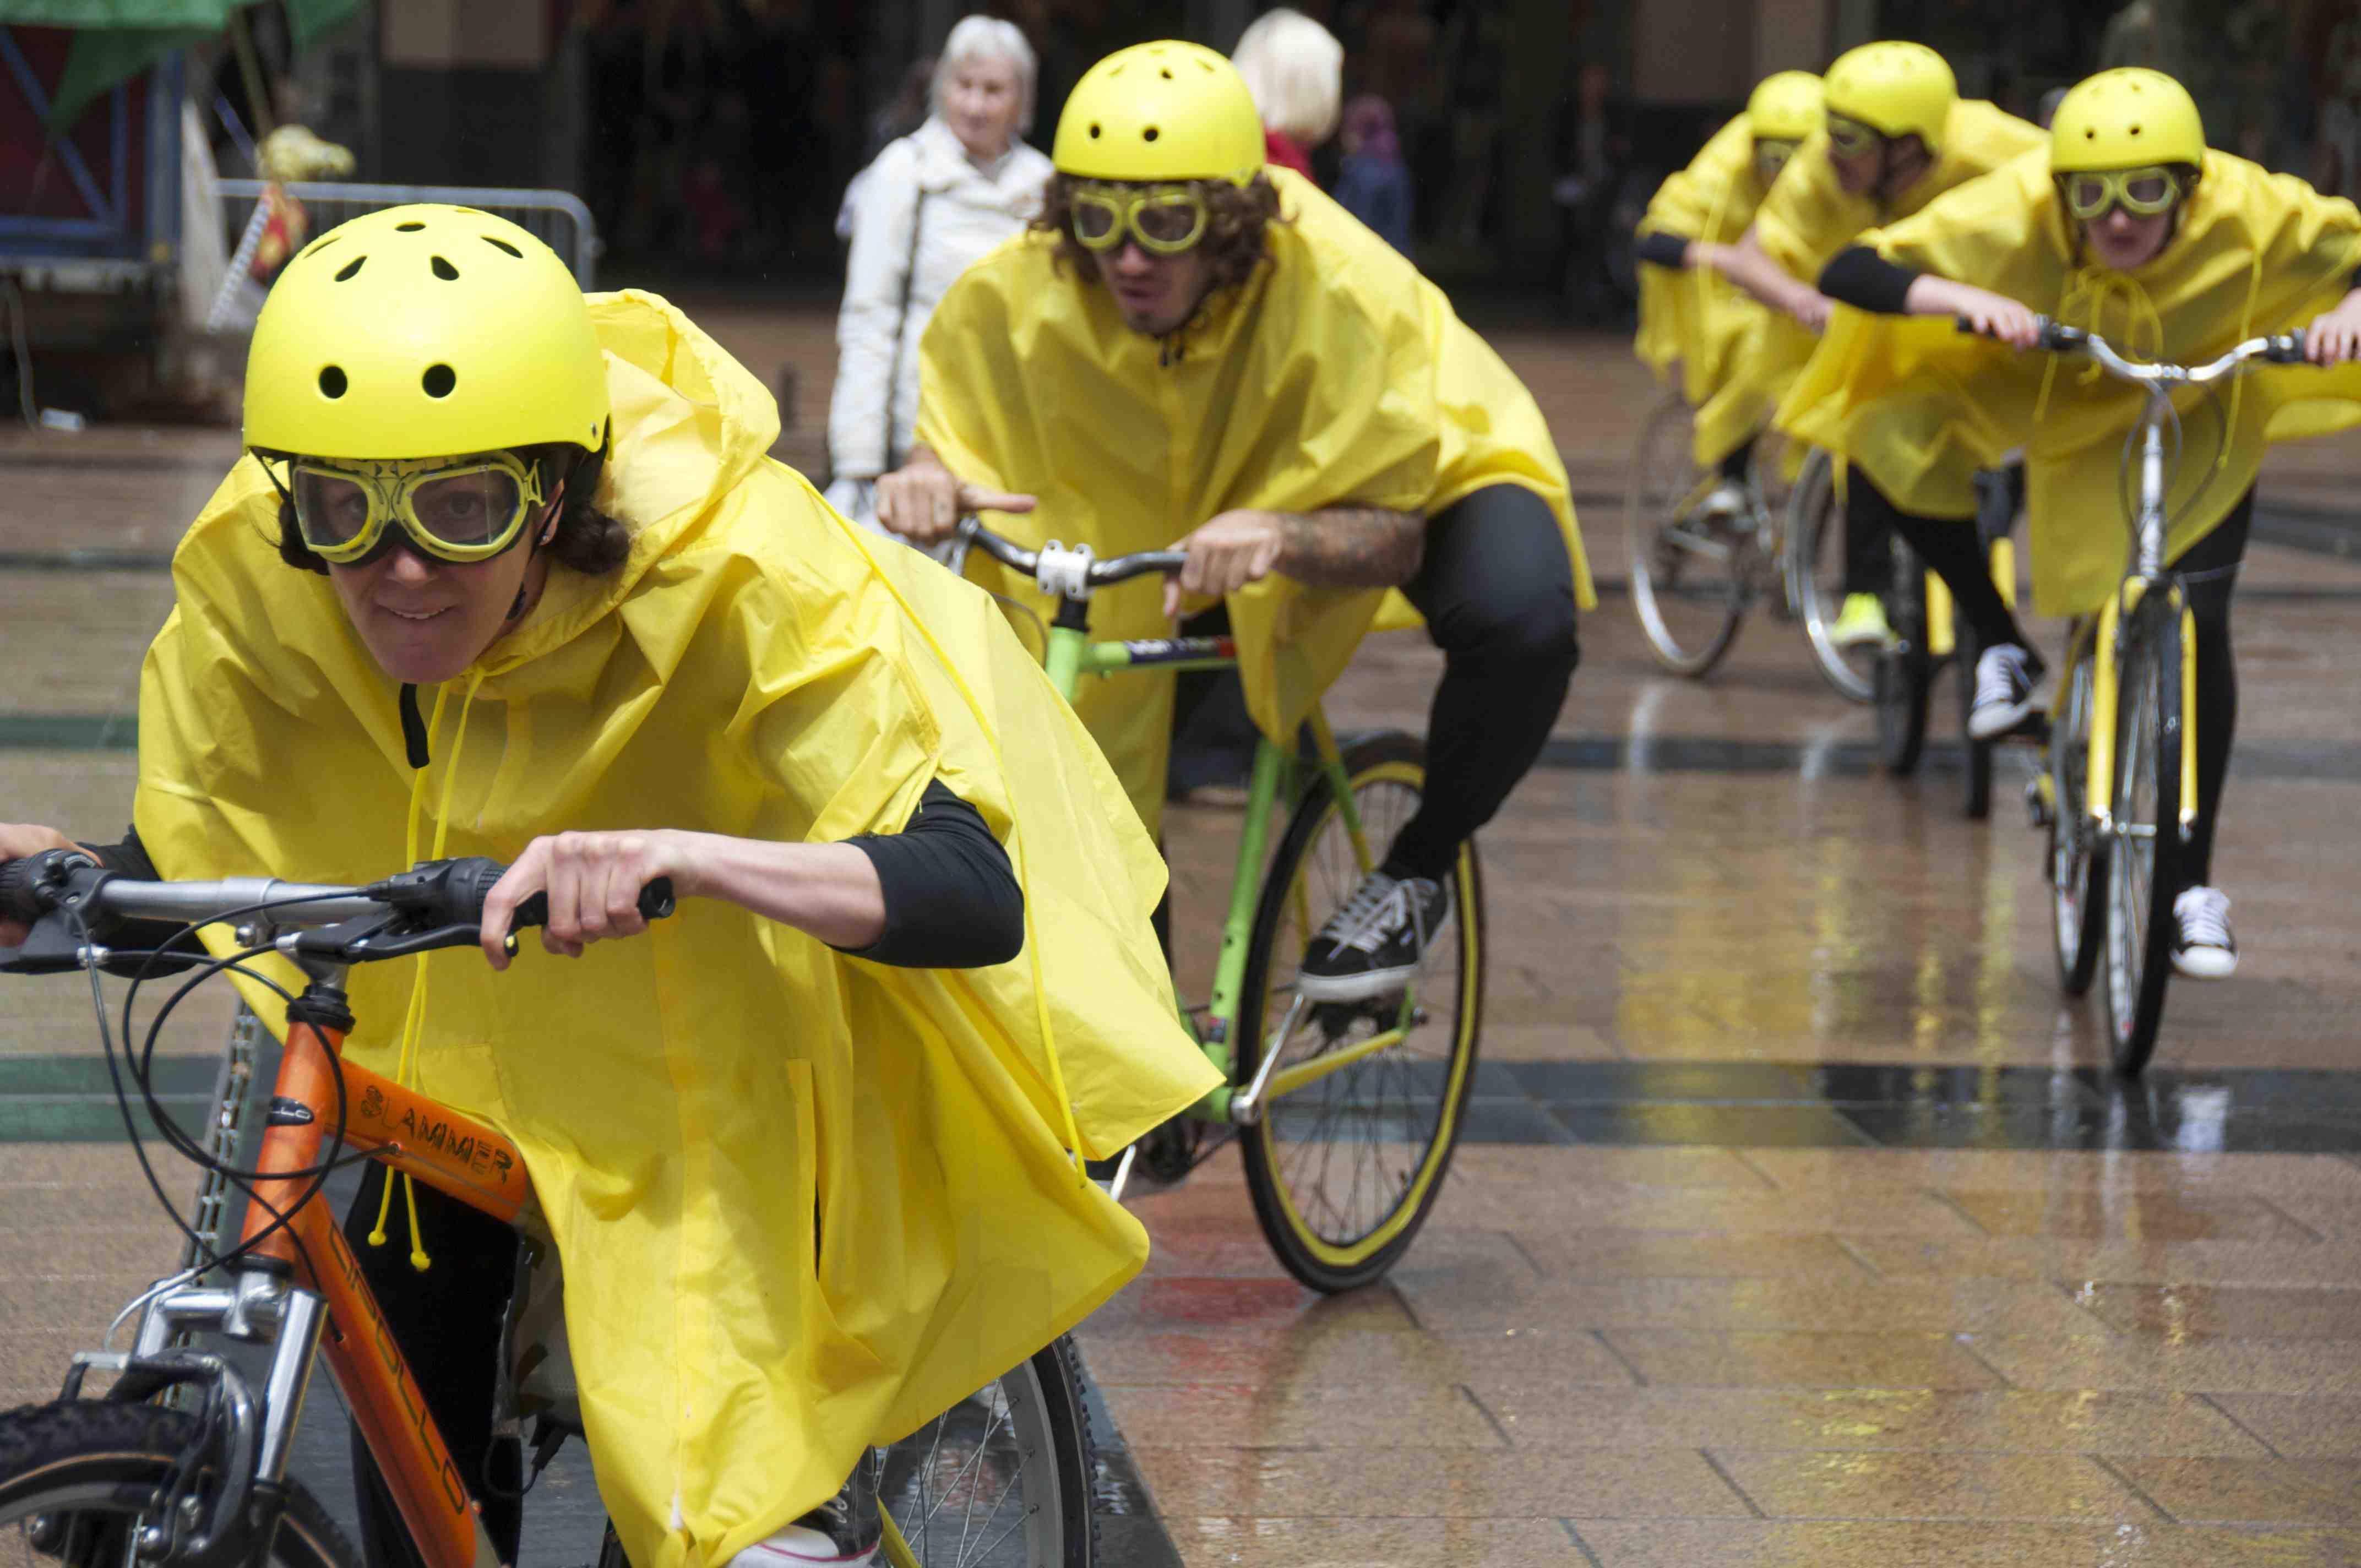 five yellow clad cyclings (helment, rain capes & goggles) lean over their handlebars and cycle towards the camera